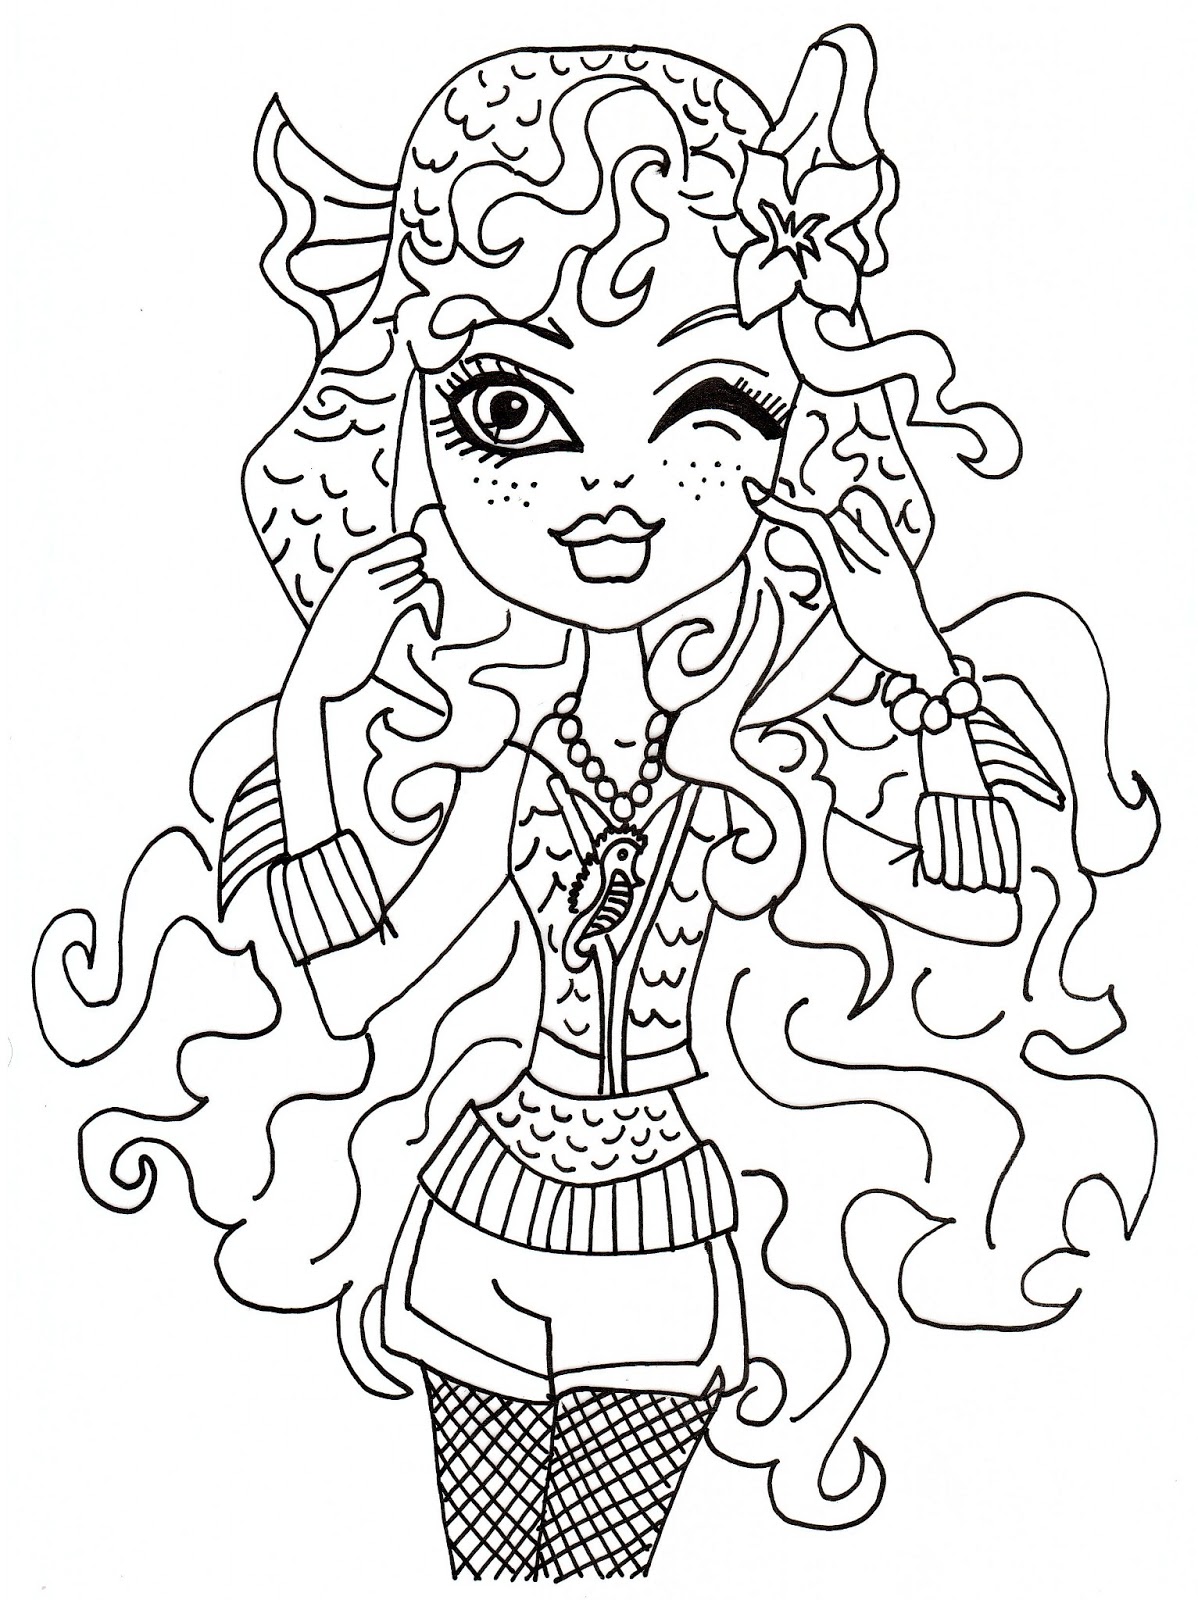 Download Free Printable Monster High Coloring Pages: Lagoona Blue Coloring Sheet